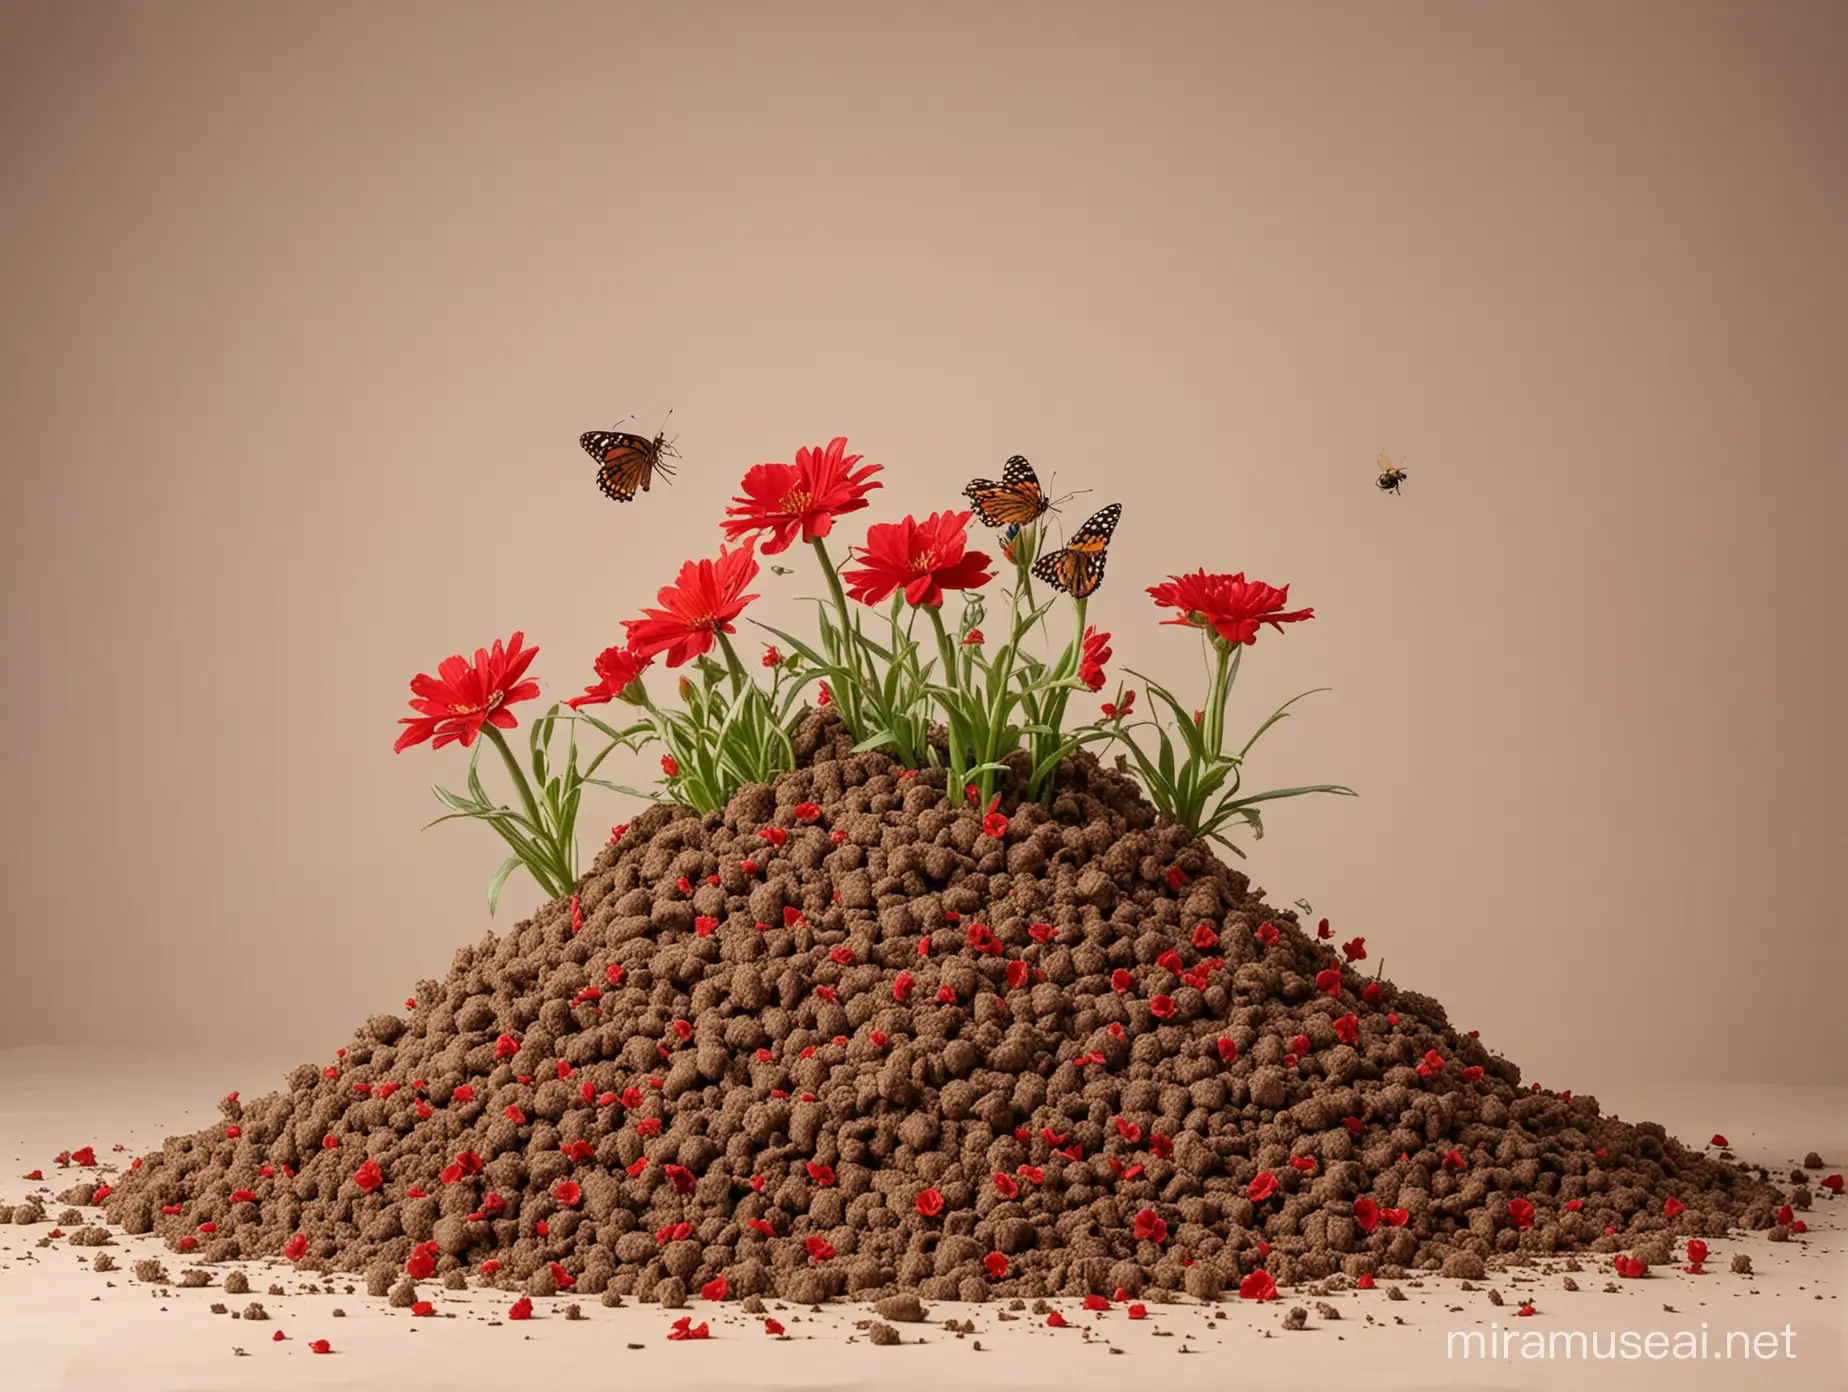 a few stalks of red flowers growing from a pile of shirts clumping together as if they are soil, but there is no soil. clean background and some butterfly and bee